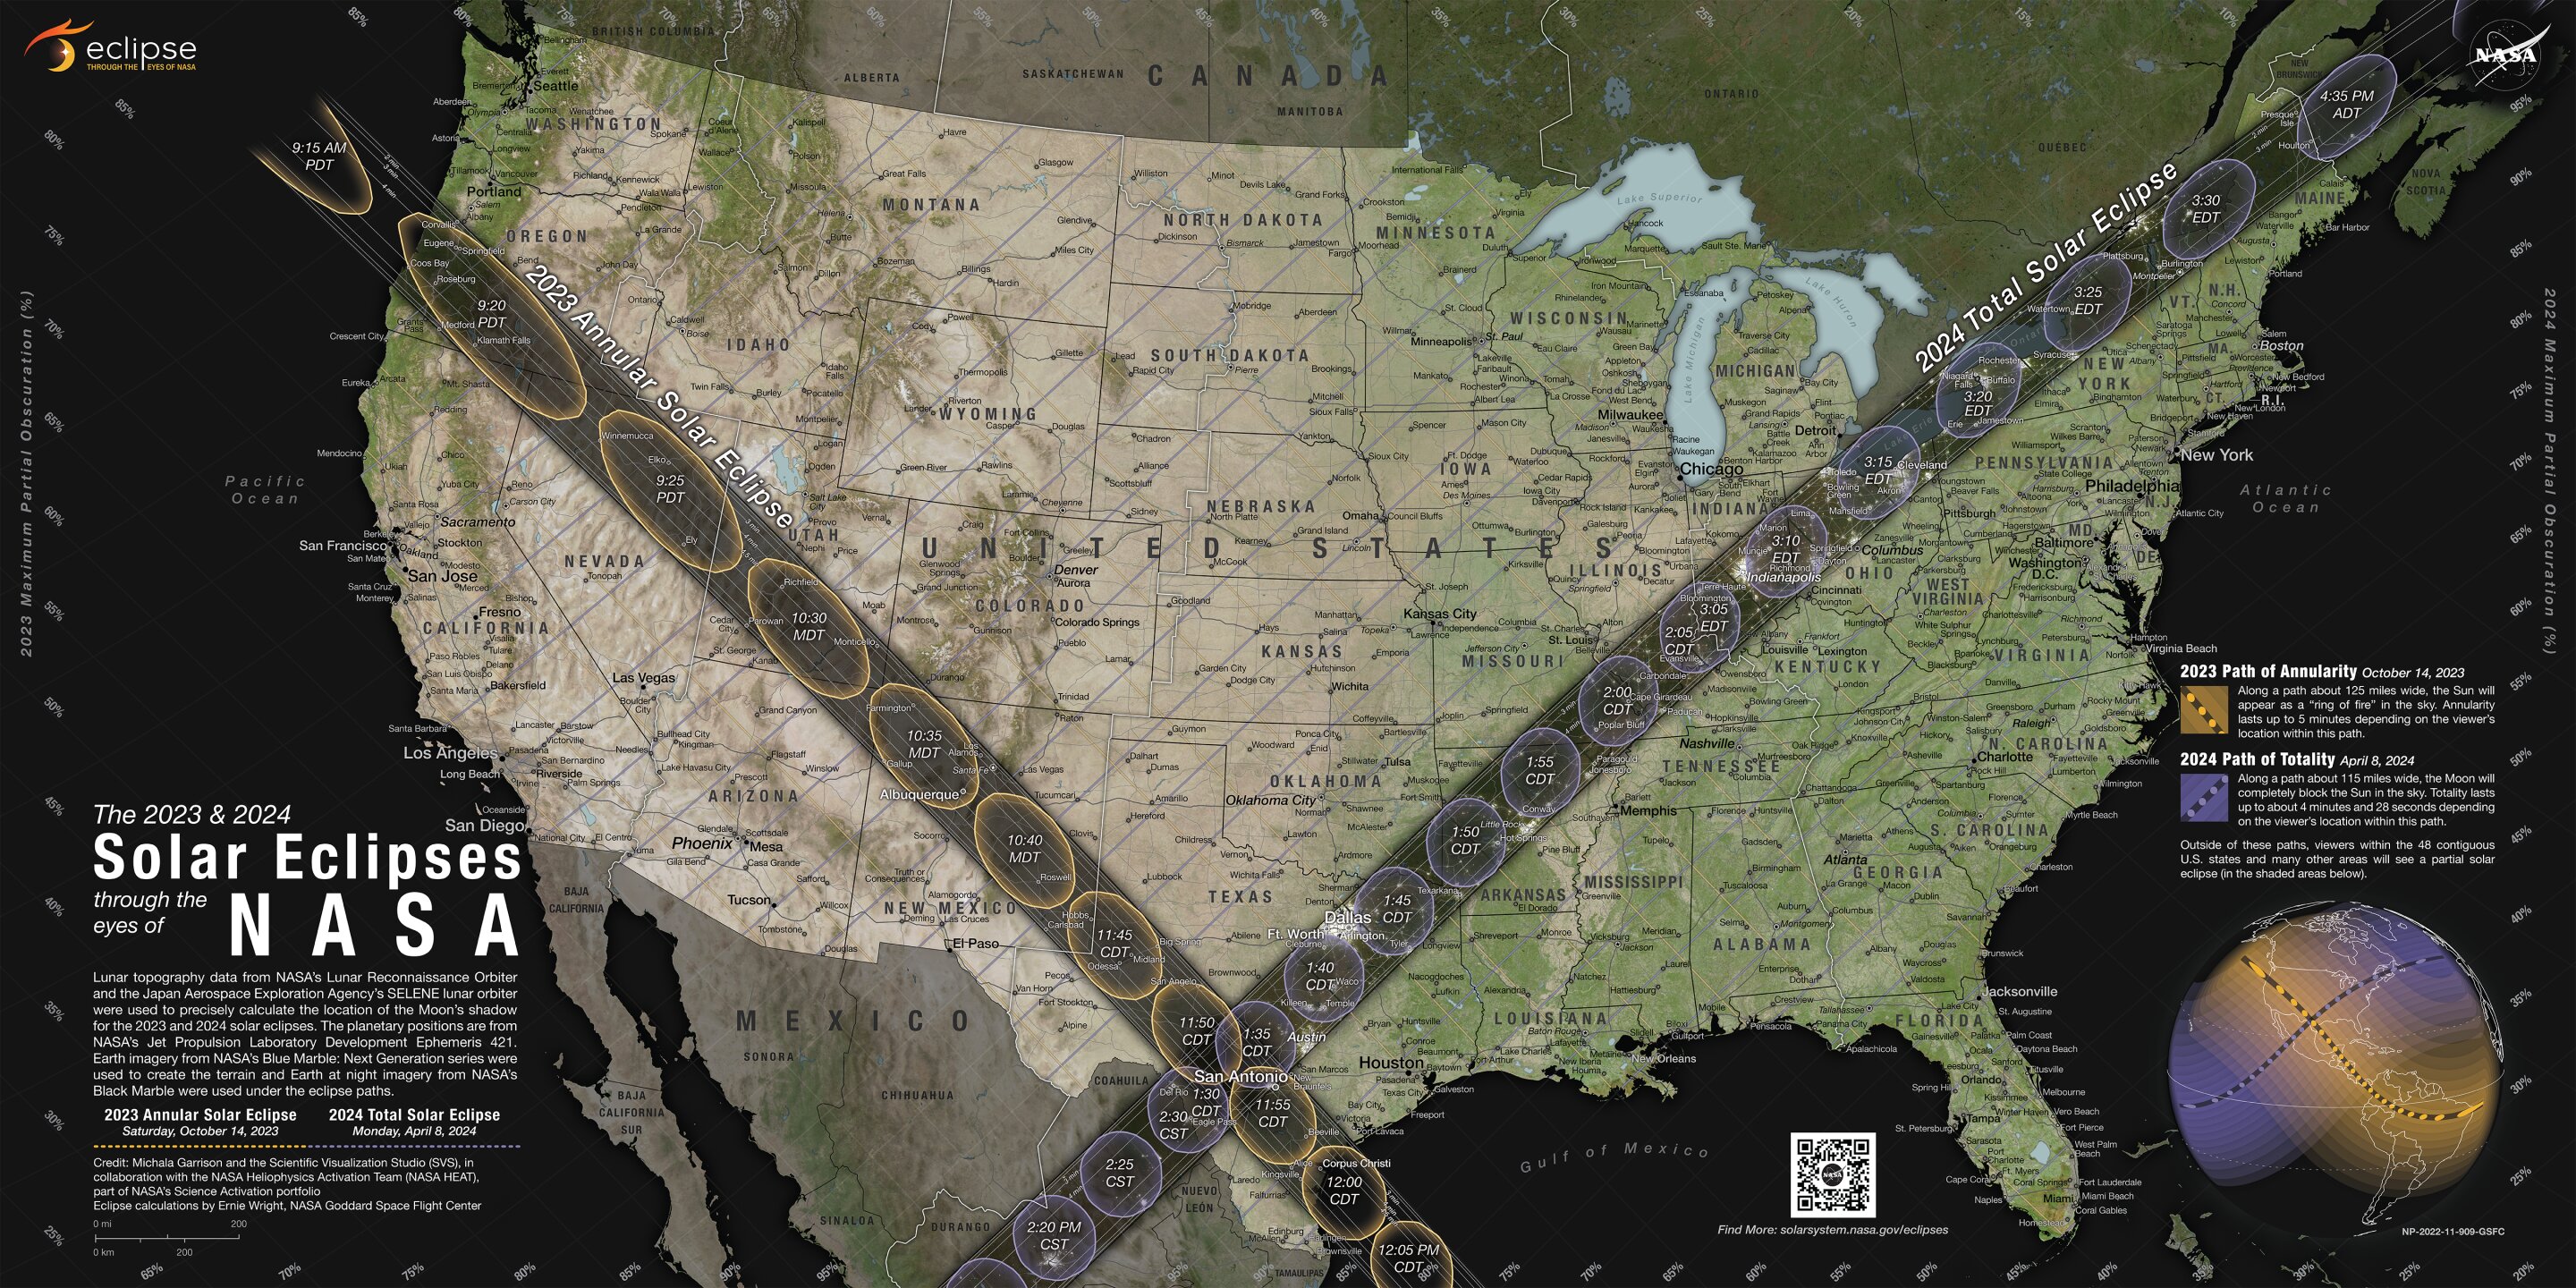 new-nasa-maps-show-2023-and-2024-solar-eclipses-in-the-us-isolo-news